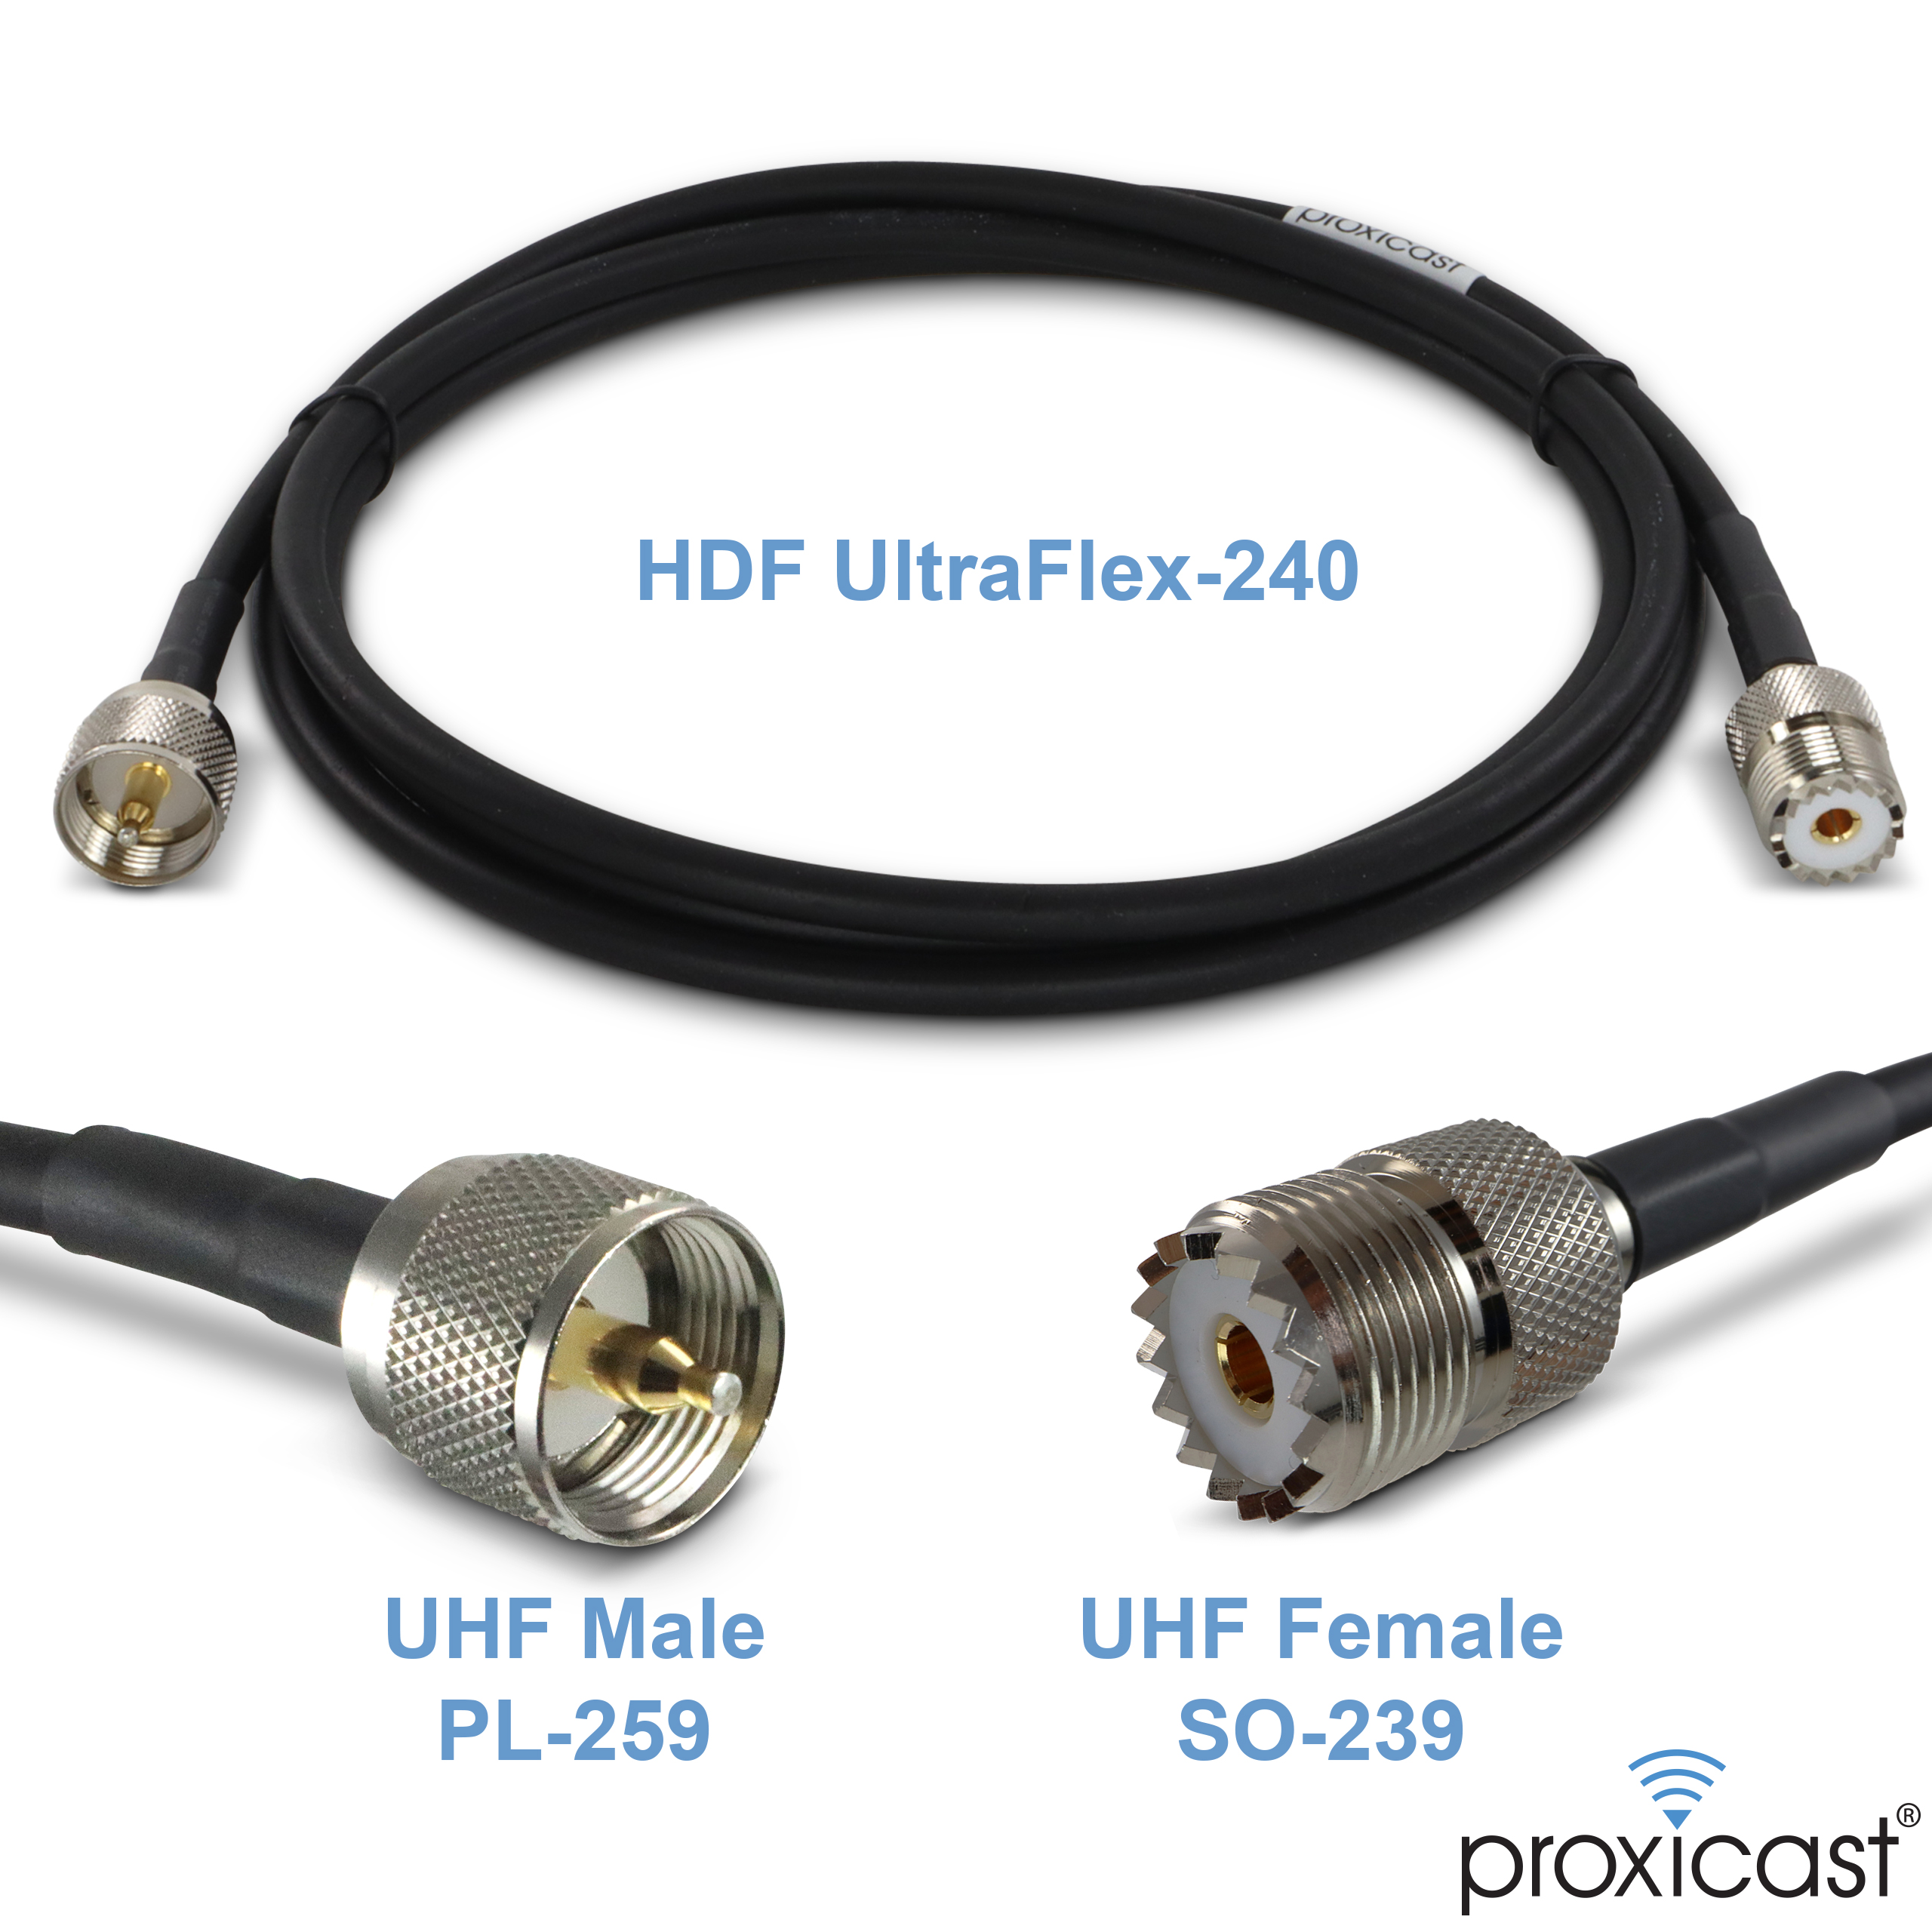 RG-8X HAM/CB Antenna Extension Cable w/ UHF PL259 & SO239 Connectors 6FT 